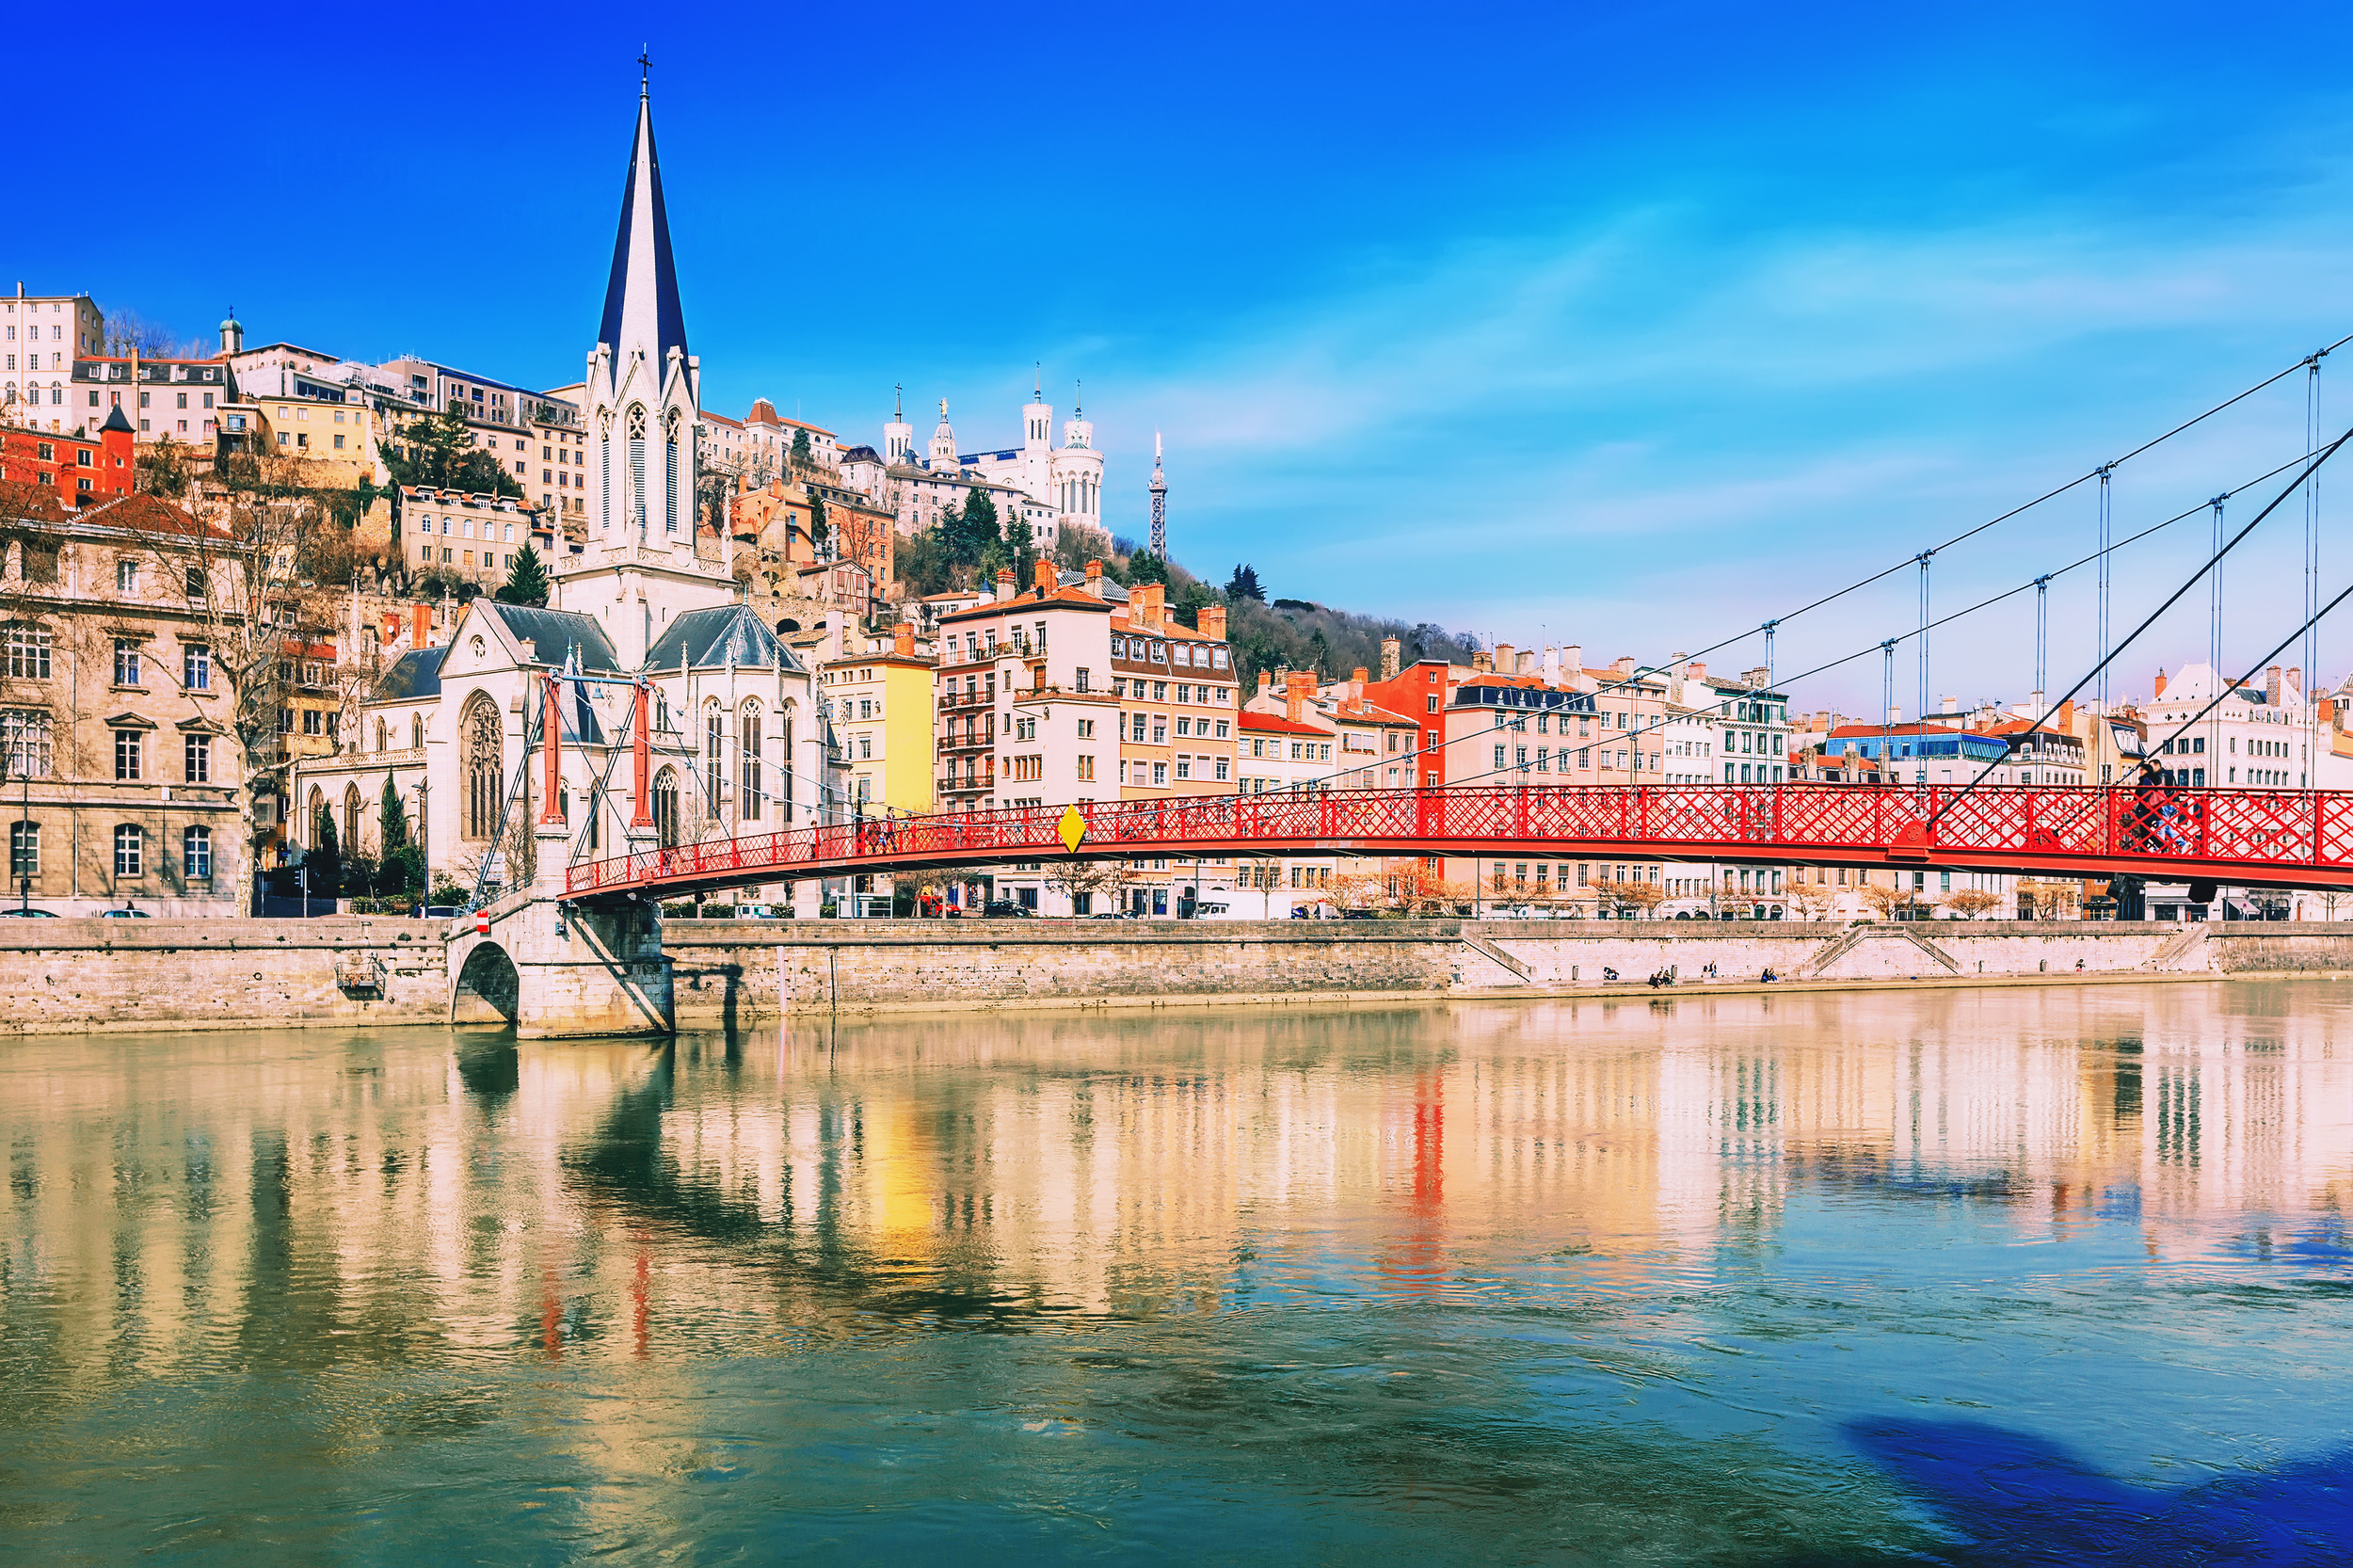 <p>France’s gastronomical capital always serves something good. And if you visit in April and May, you can enjoy glorious weather before a bit of spring hiking in the Alps. Stroll along the Rhone or Saone Rivers, or have a coffee outside at Confluence, where the two turquoise bodies of water meet! </p><p><a href='https://www.msn.com/en-us/community/channel/vid-cj9pqbr0vn9in2b6ddcd8sfgpfq6x6utp44fssrv6mc2gtybw0us'>Follow us on MSN to see more of our exclusive lifestyle content.</a></p>